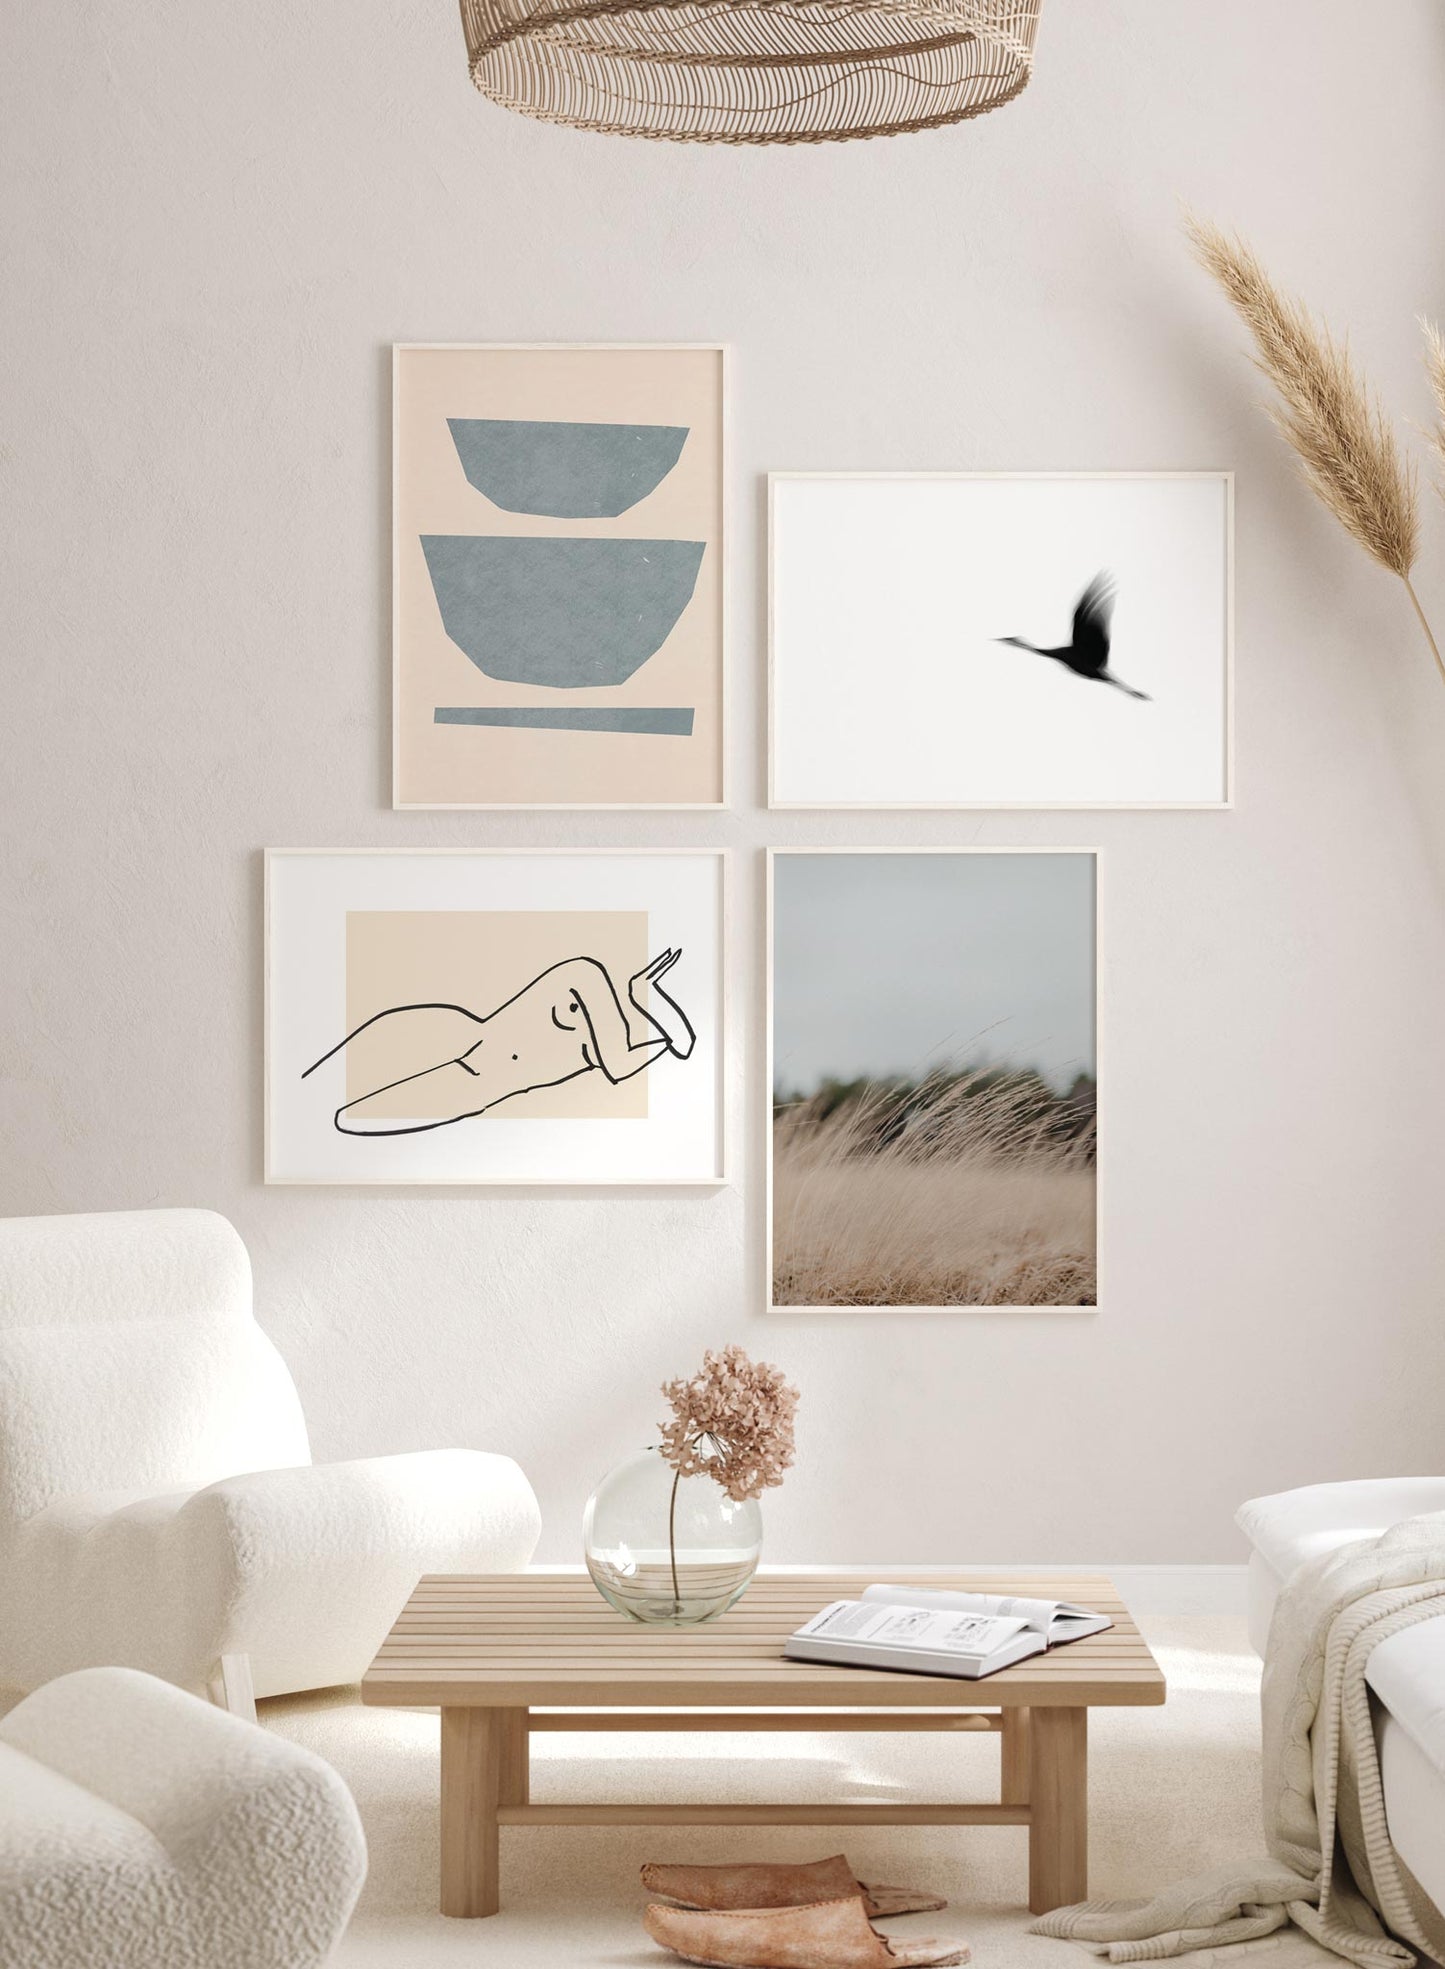 "Autumn Breeze" is a botanical photography poster by Opposite Wall of fine and delicate beige grasses swaying in the wind during the fall season.